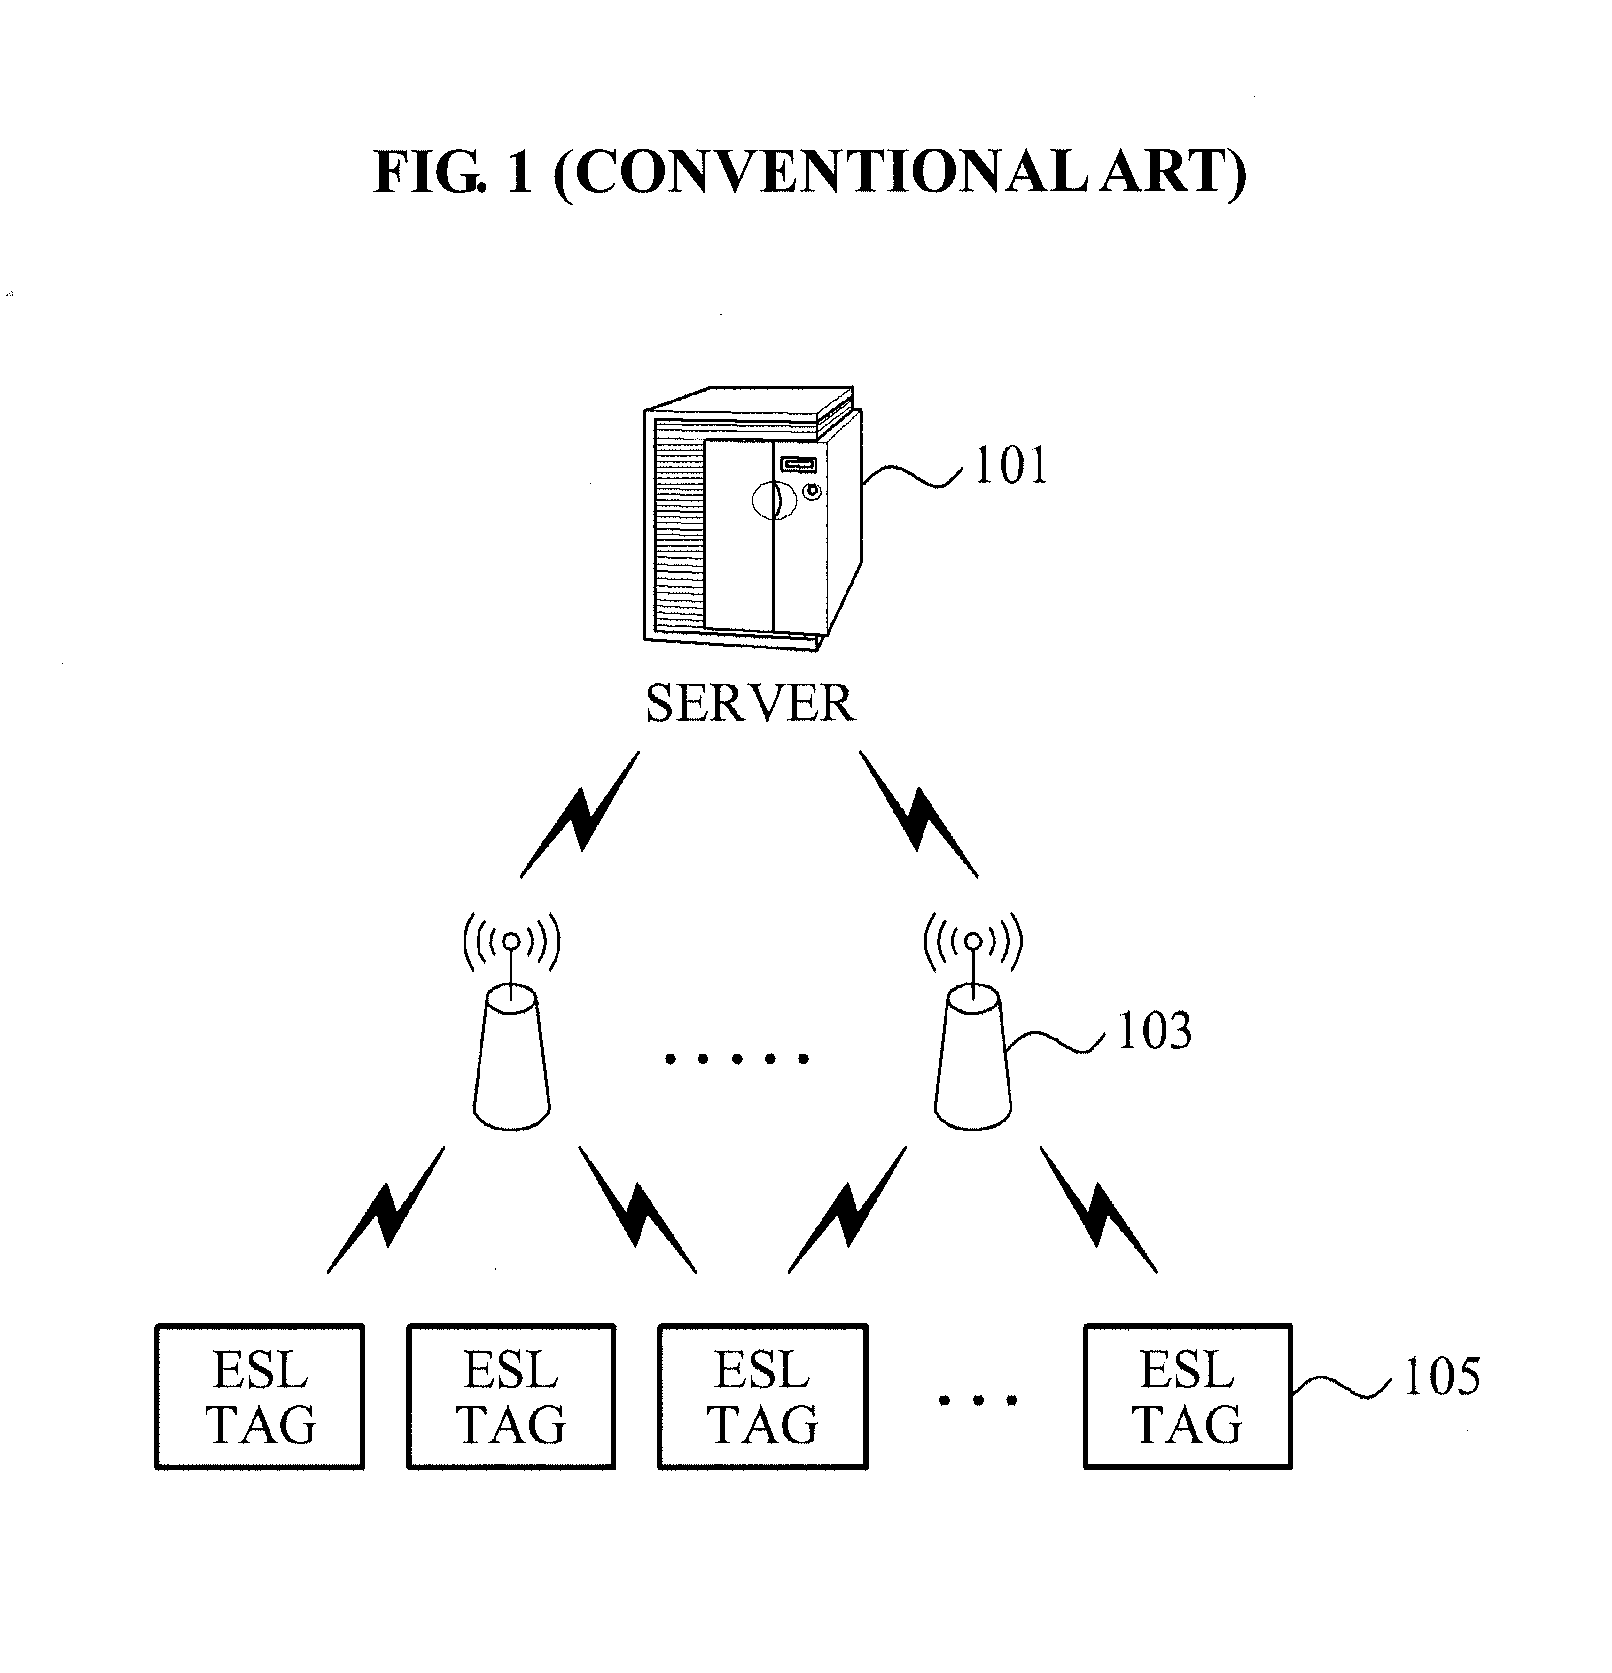 Electronic shelf label (ESL) apparatus using radio frequency identification (RFID) and method for operating the esl apparatus